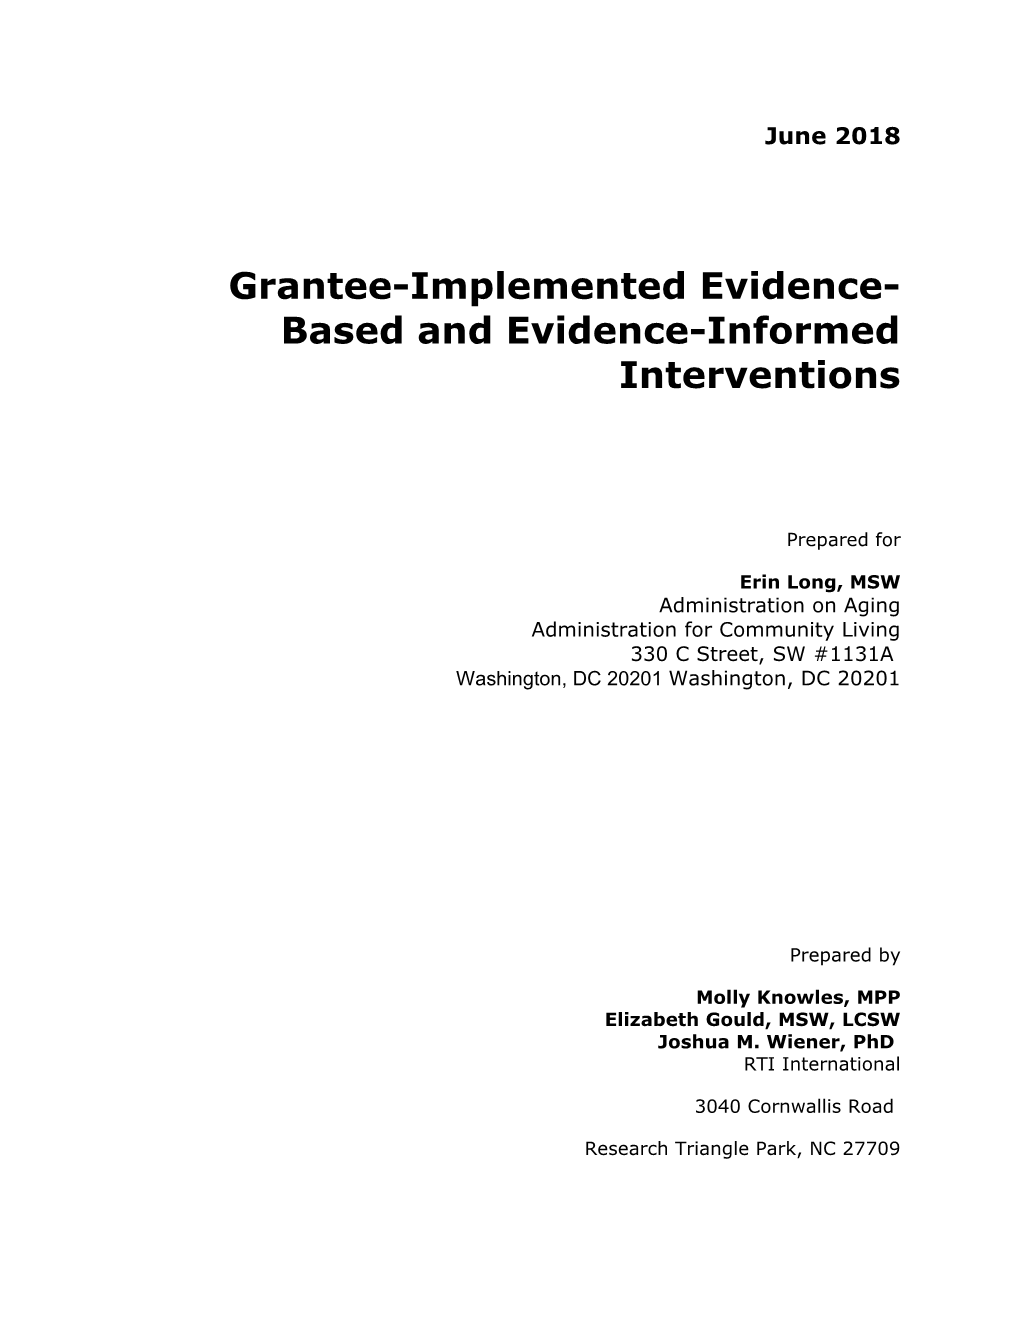 Grantee-Implemented Evidence-Based and Evidence-Informed Interventions